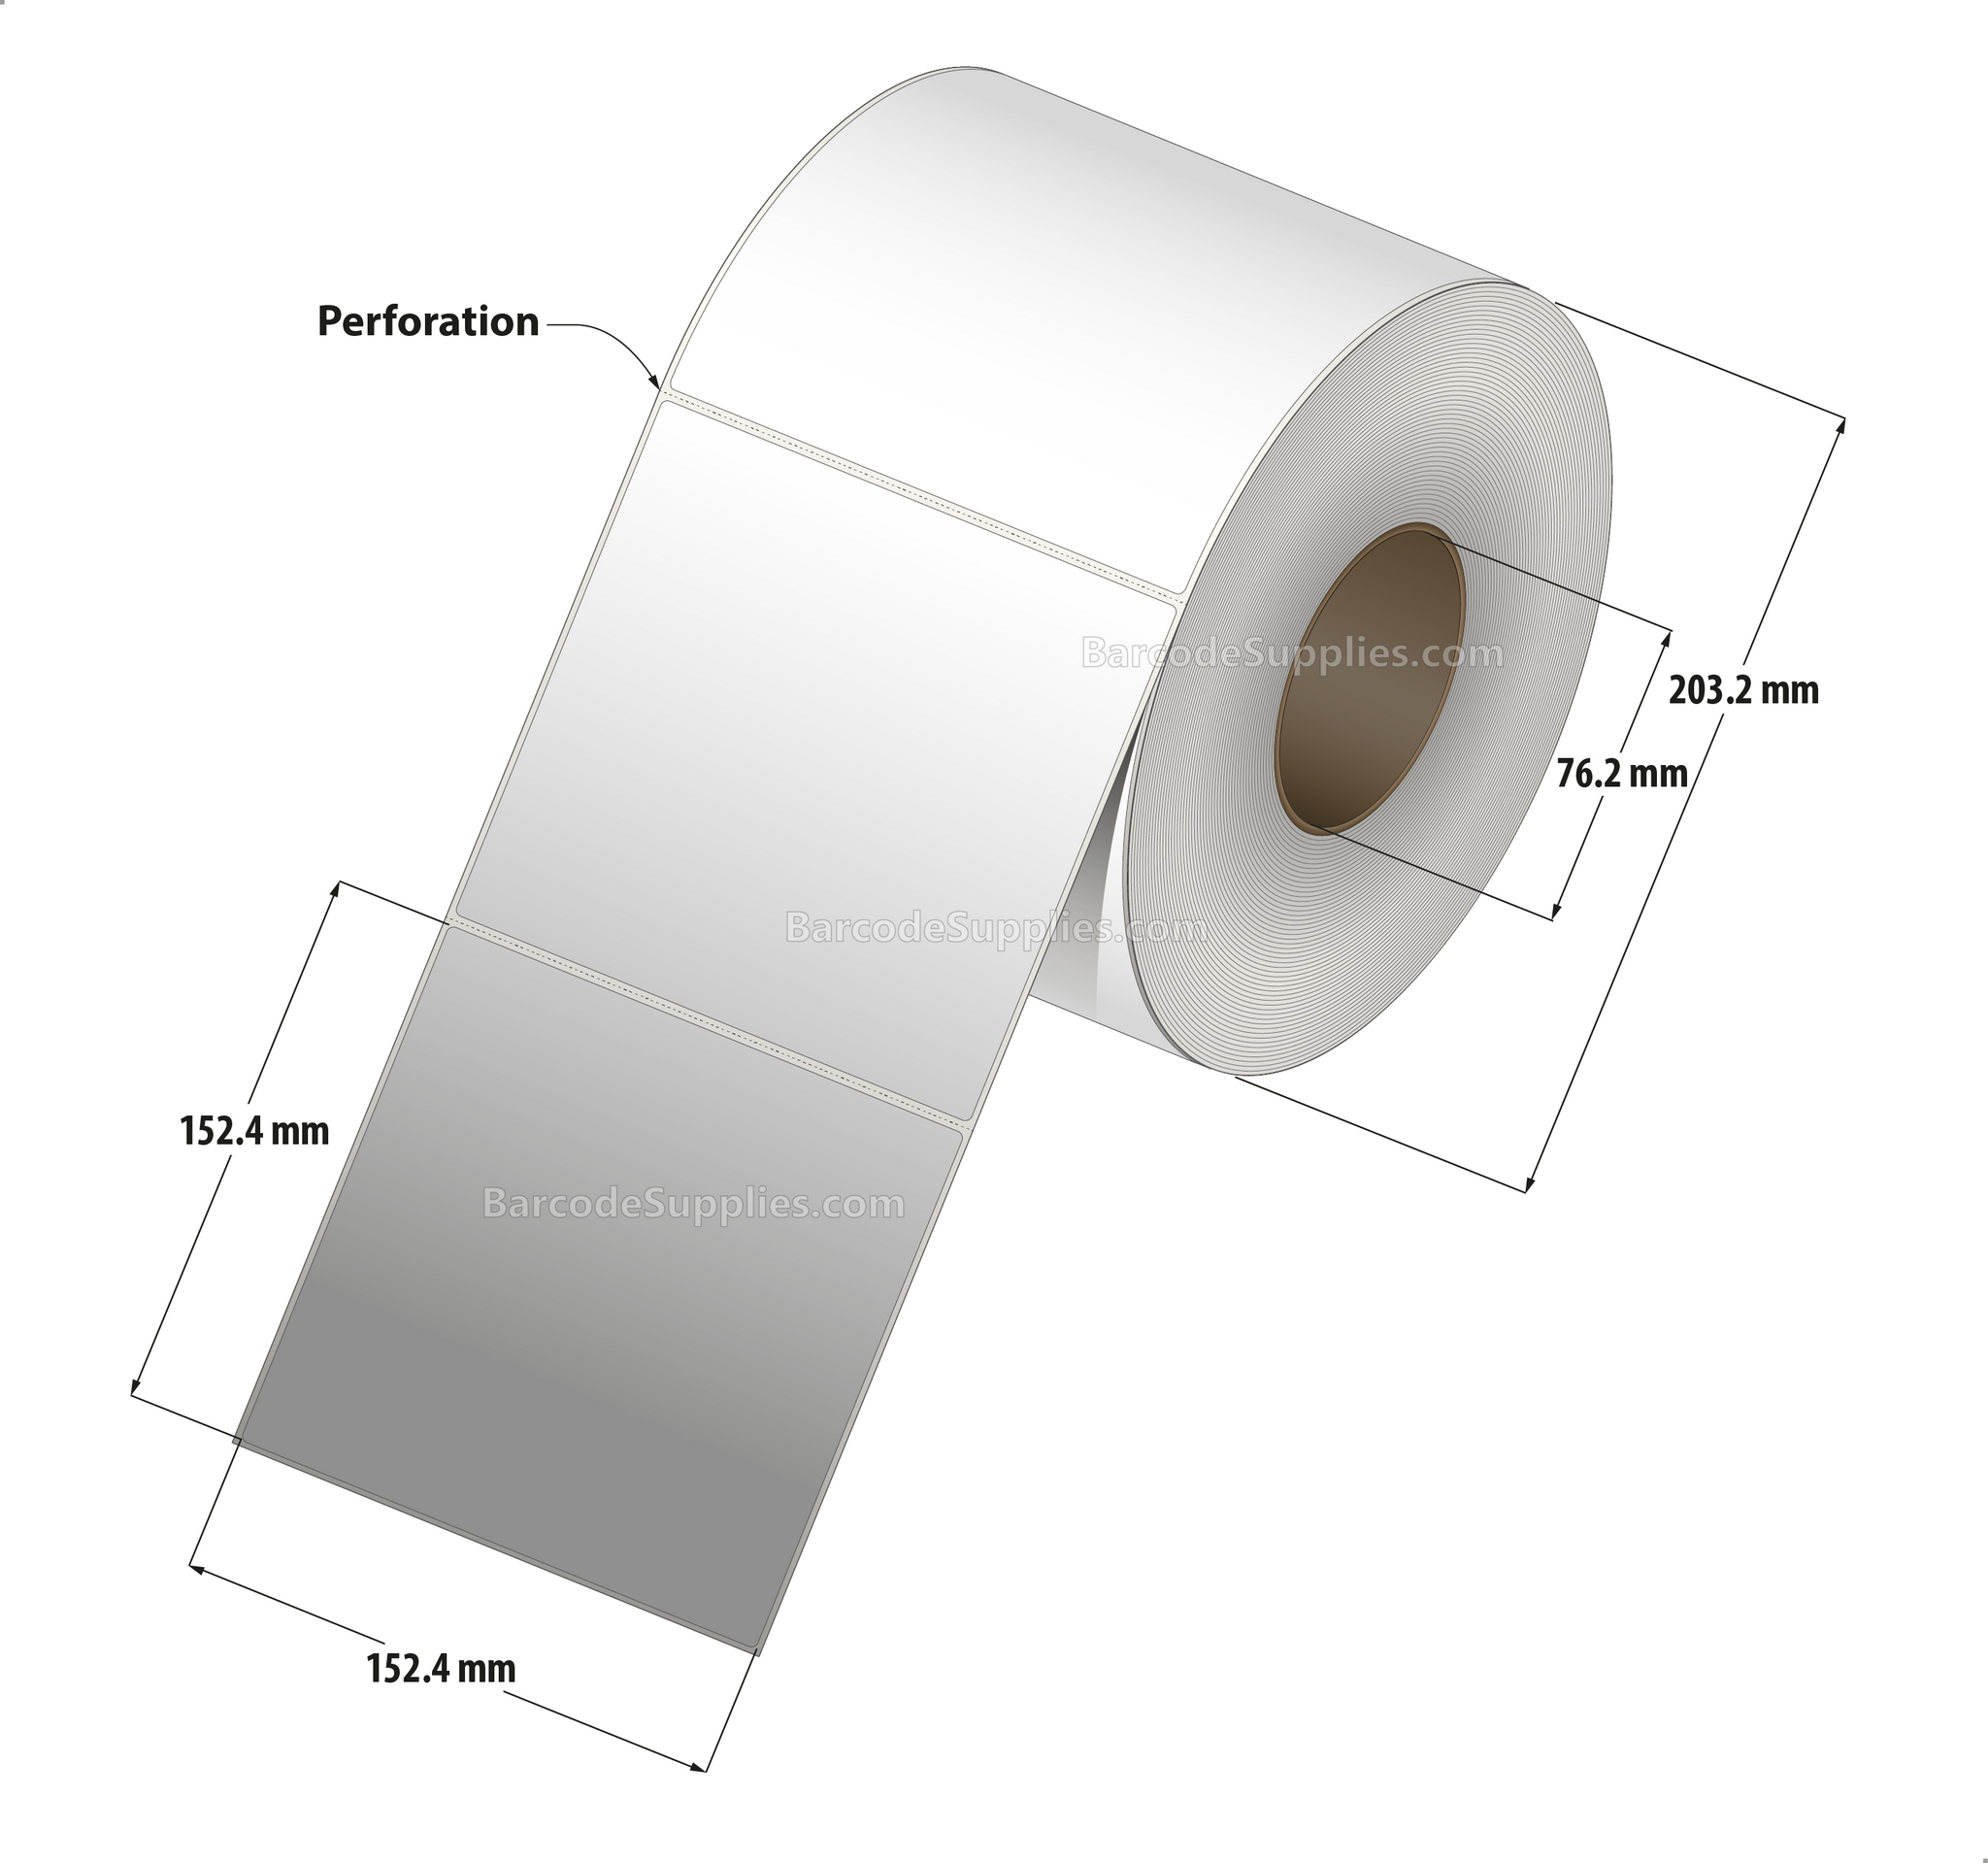 6 x 6 Thermal Transfer White Labels With Permanent Adhesive - Perforated - 1000 Labels Per Roll - Carton Of 4 Rolls - 4000 Labels Total - MPN: RT-6-6-1000-3